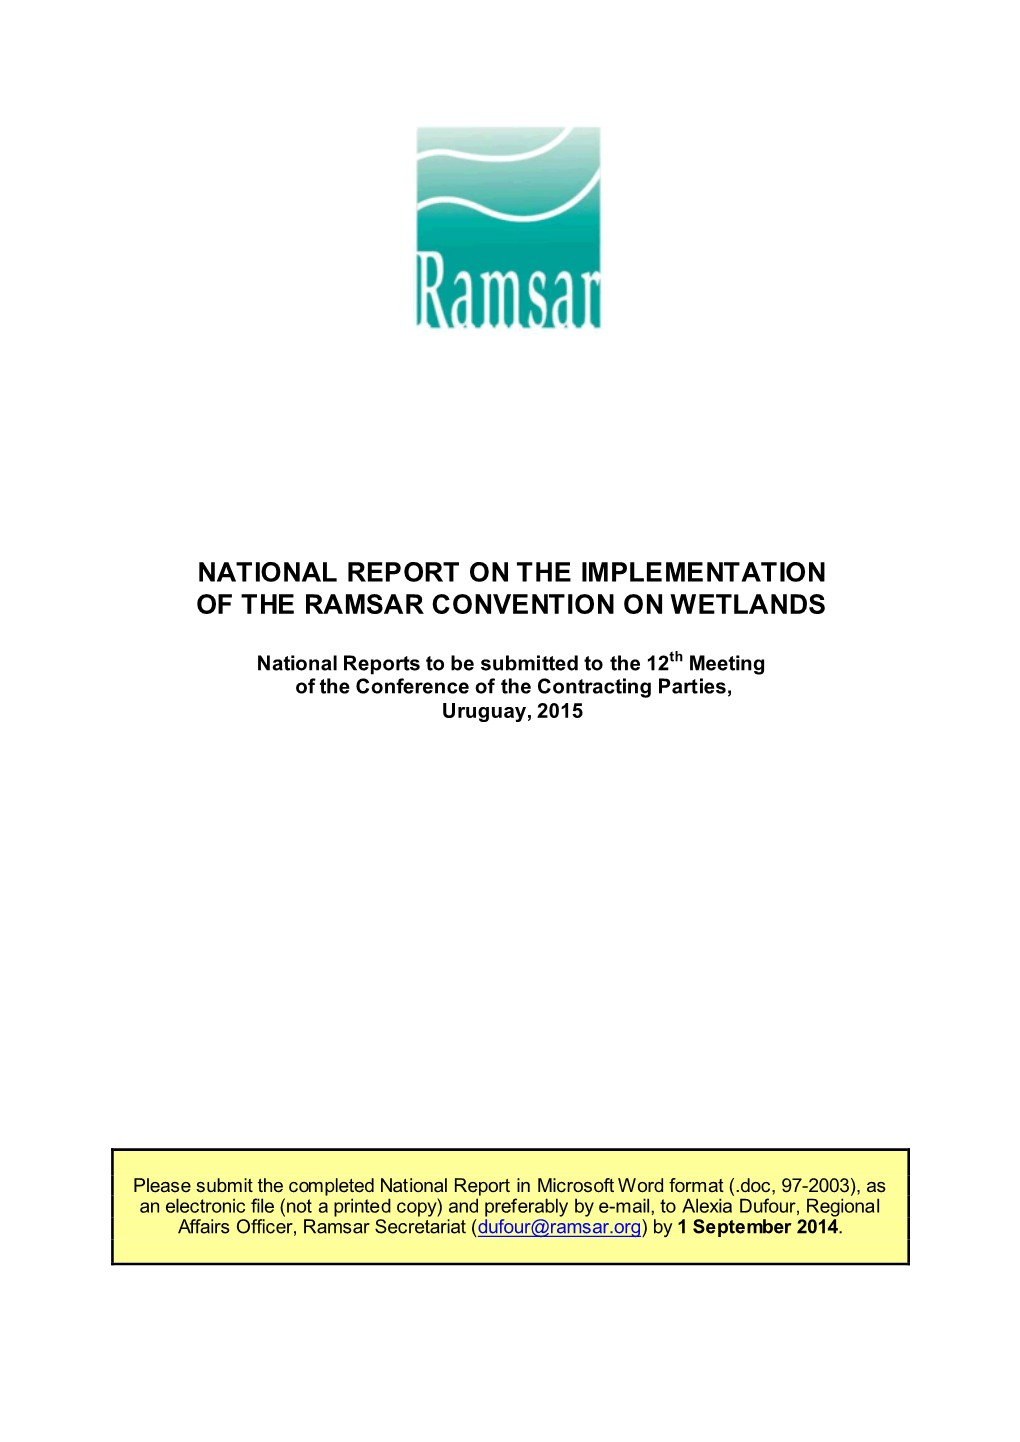 National Report on the Implementation of the Ramsar Convention on Wetlands